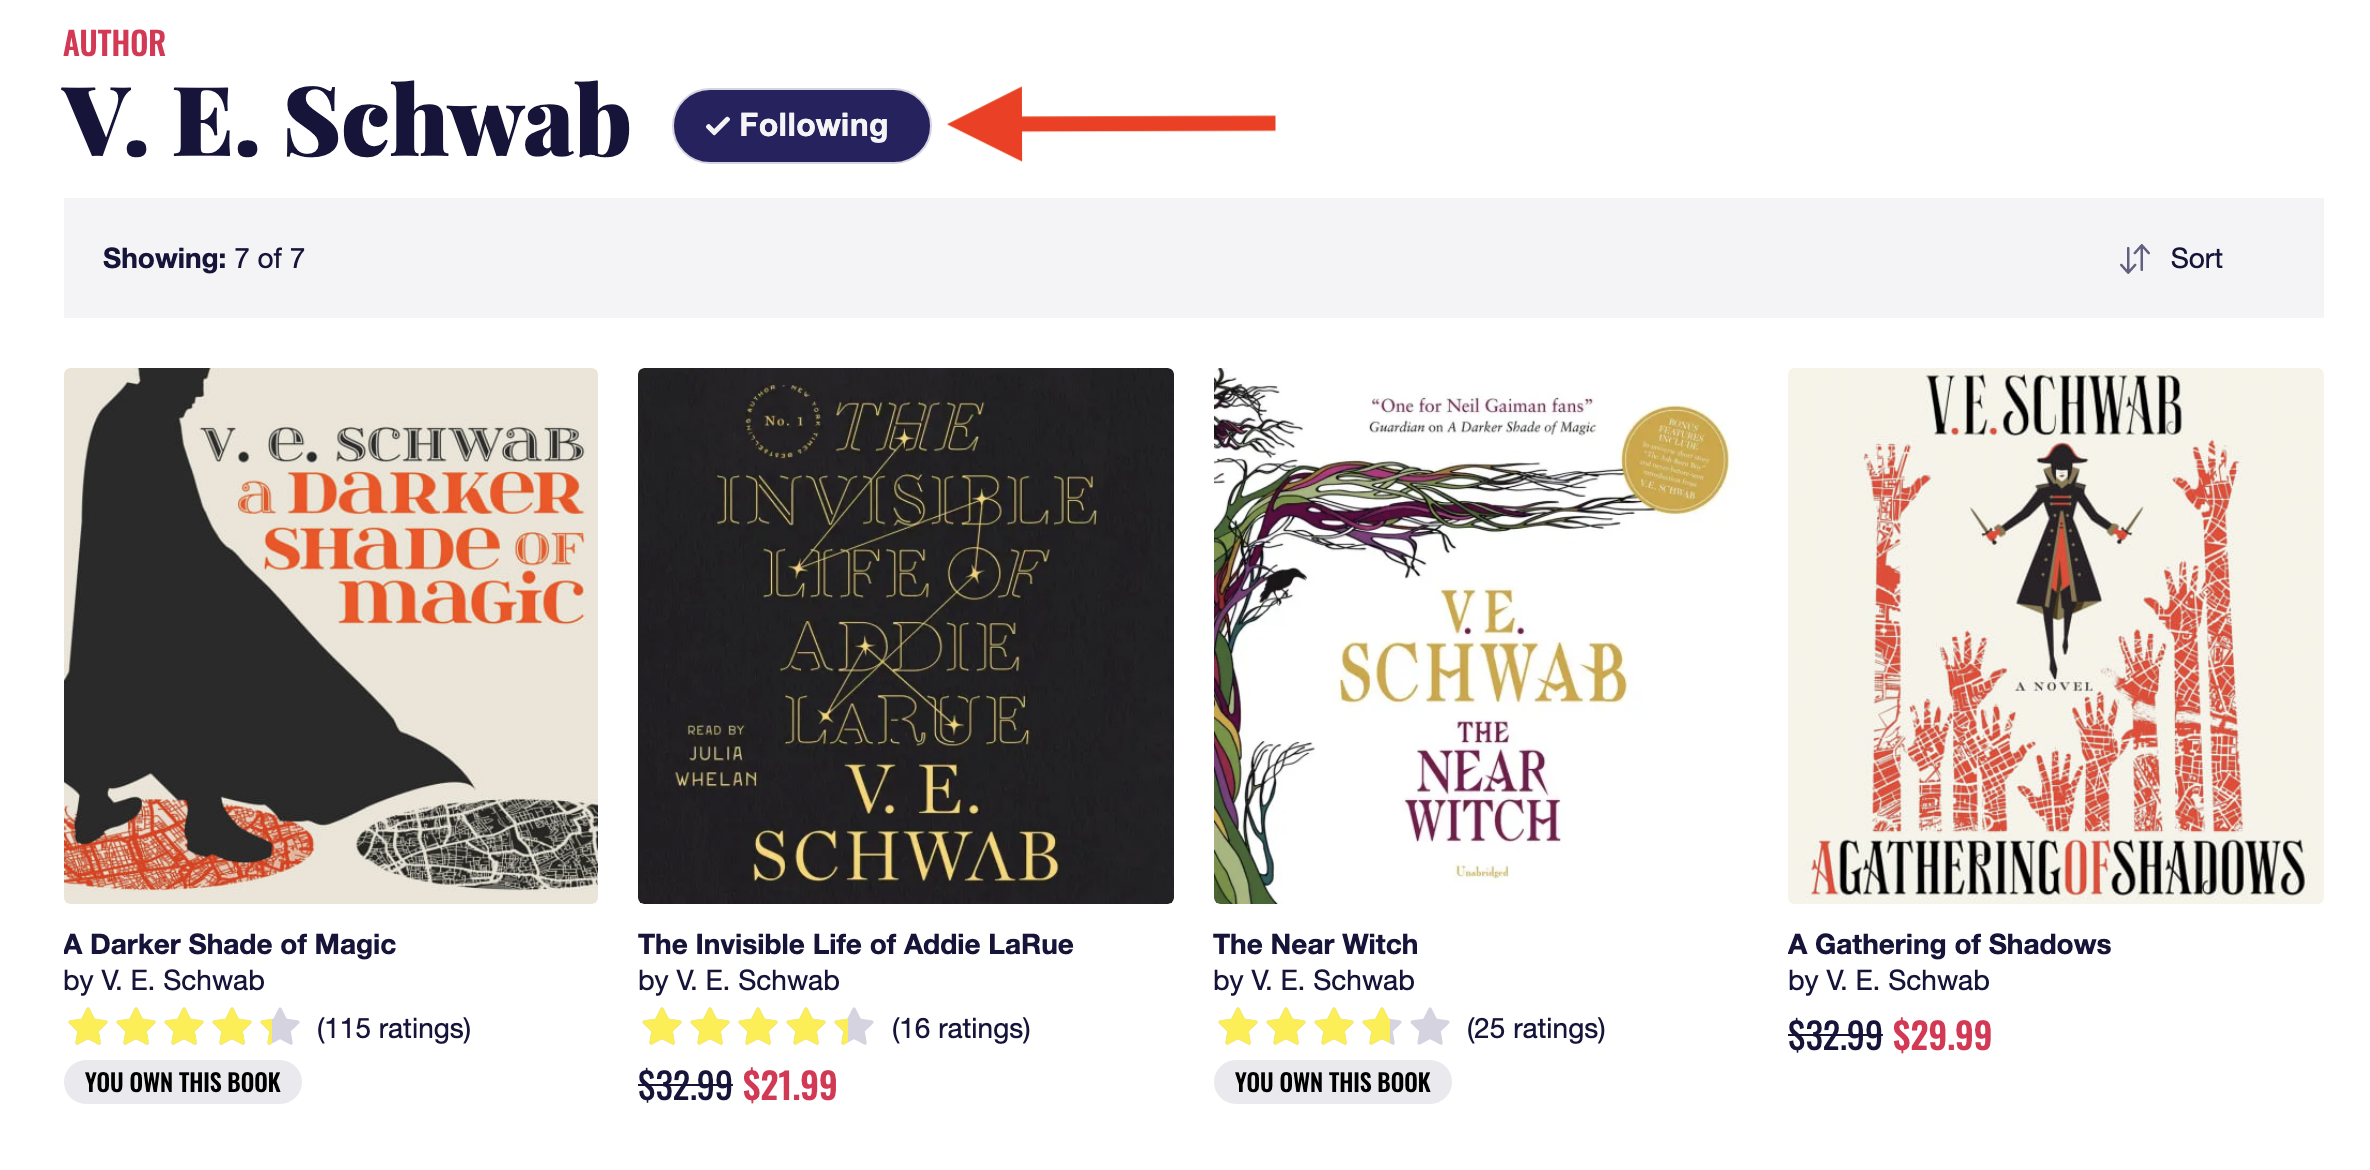 V.E Schwab’s author page on Chirp, which is now followed. A red arrow points to the now checked follow button.